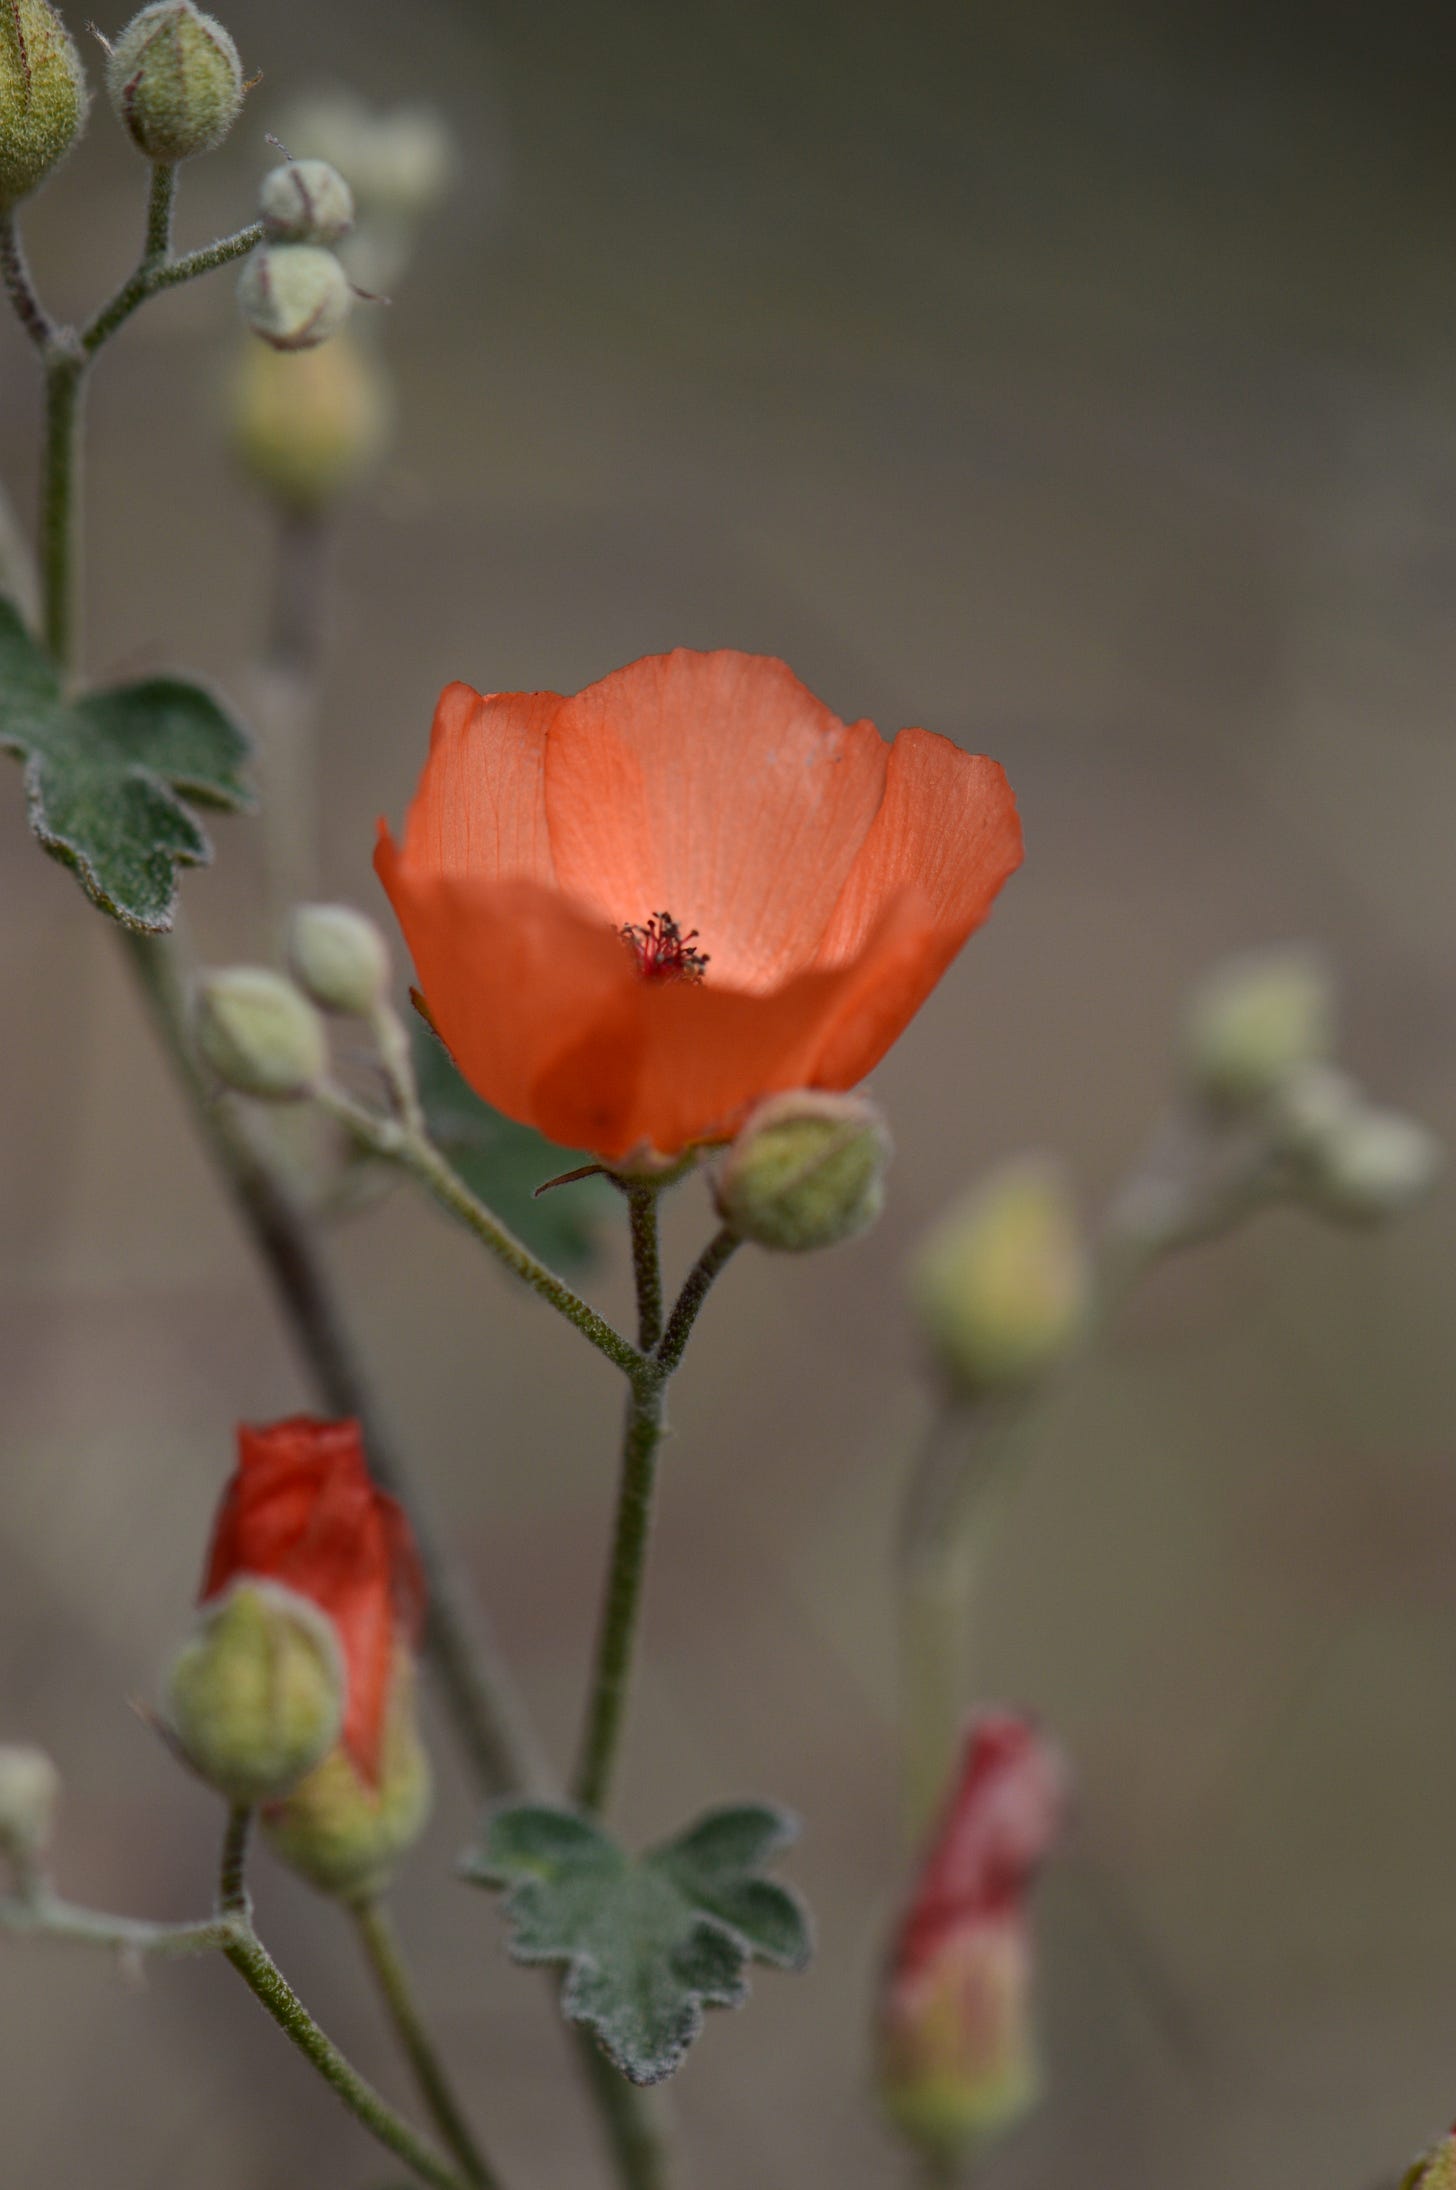 a close-up image of an orange wildflower, pale green buds and scalloped leaves on wiry stems